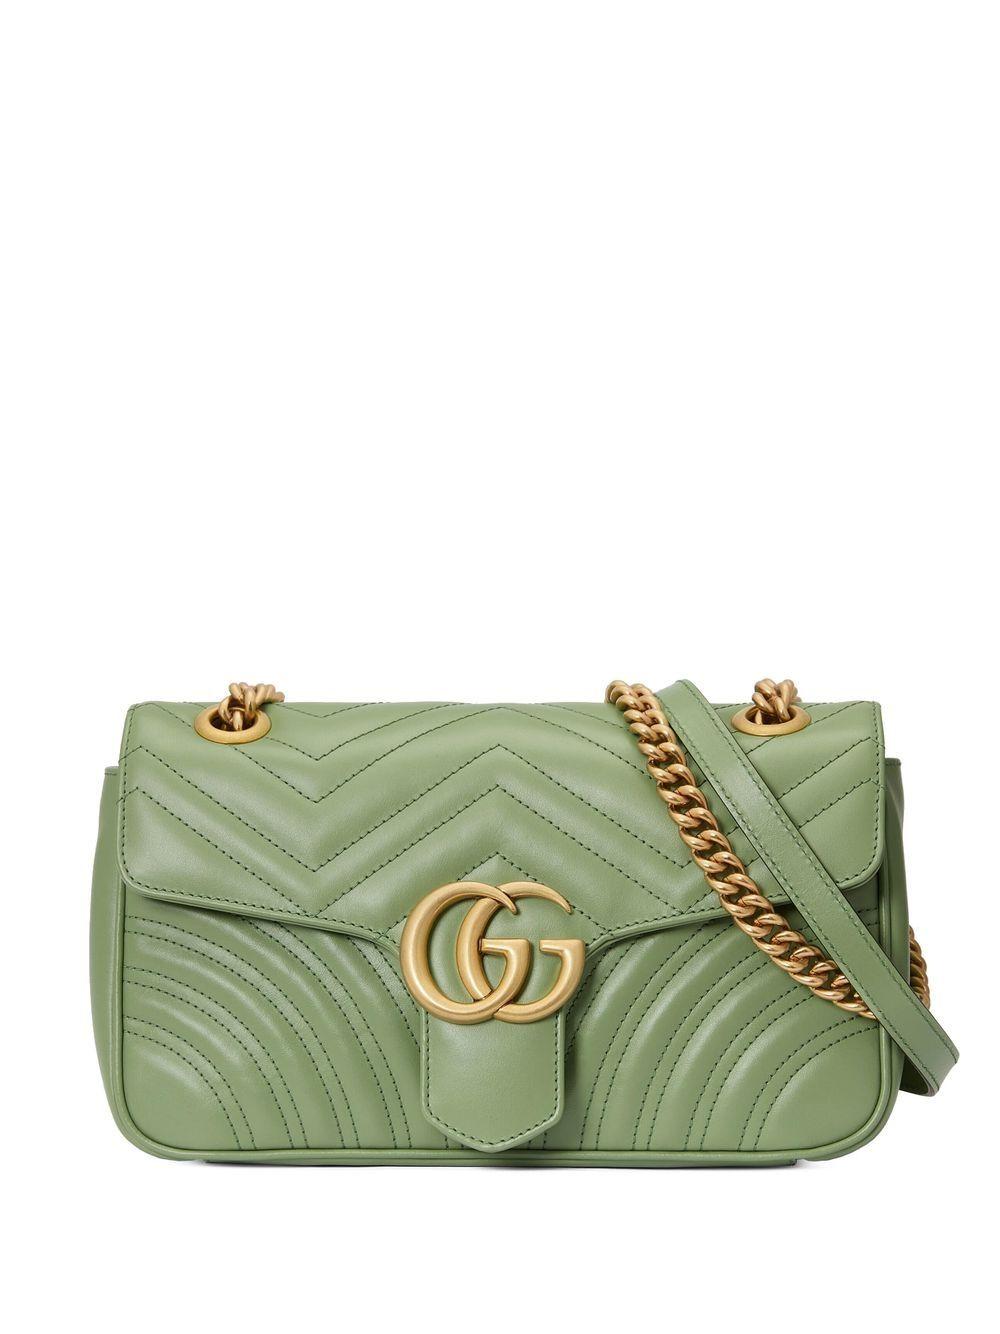 Gucci Green Matelasse Leather Small GG Marmont Shoulder Bag Gucci | The  Luxury Closet